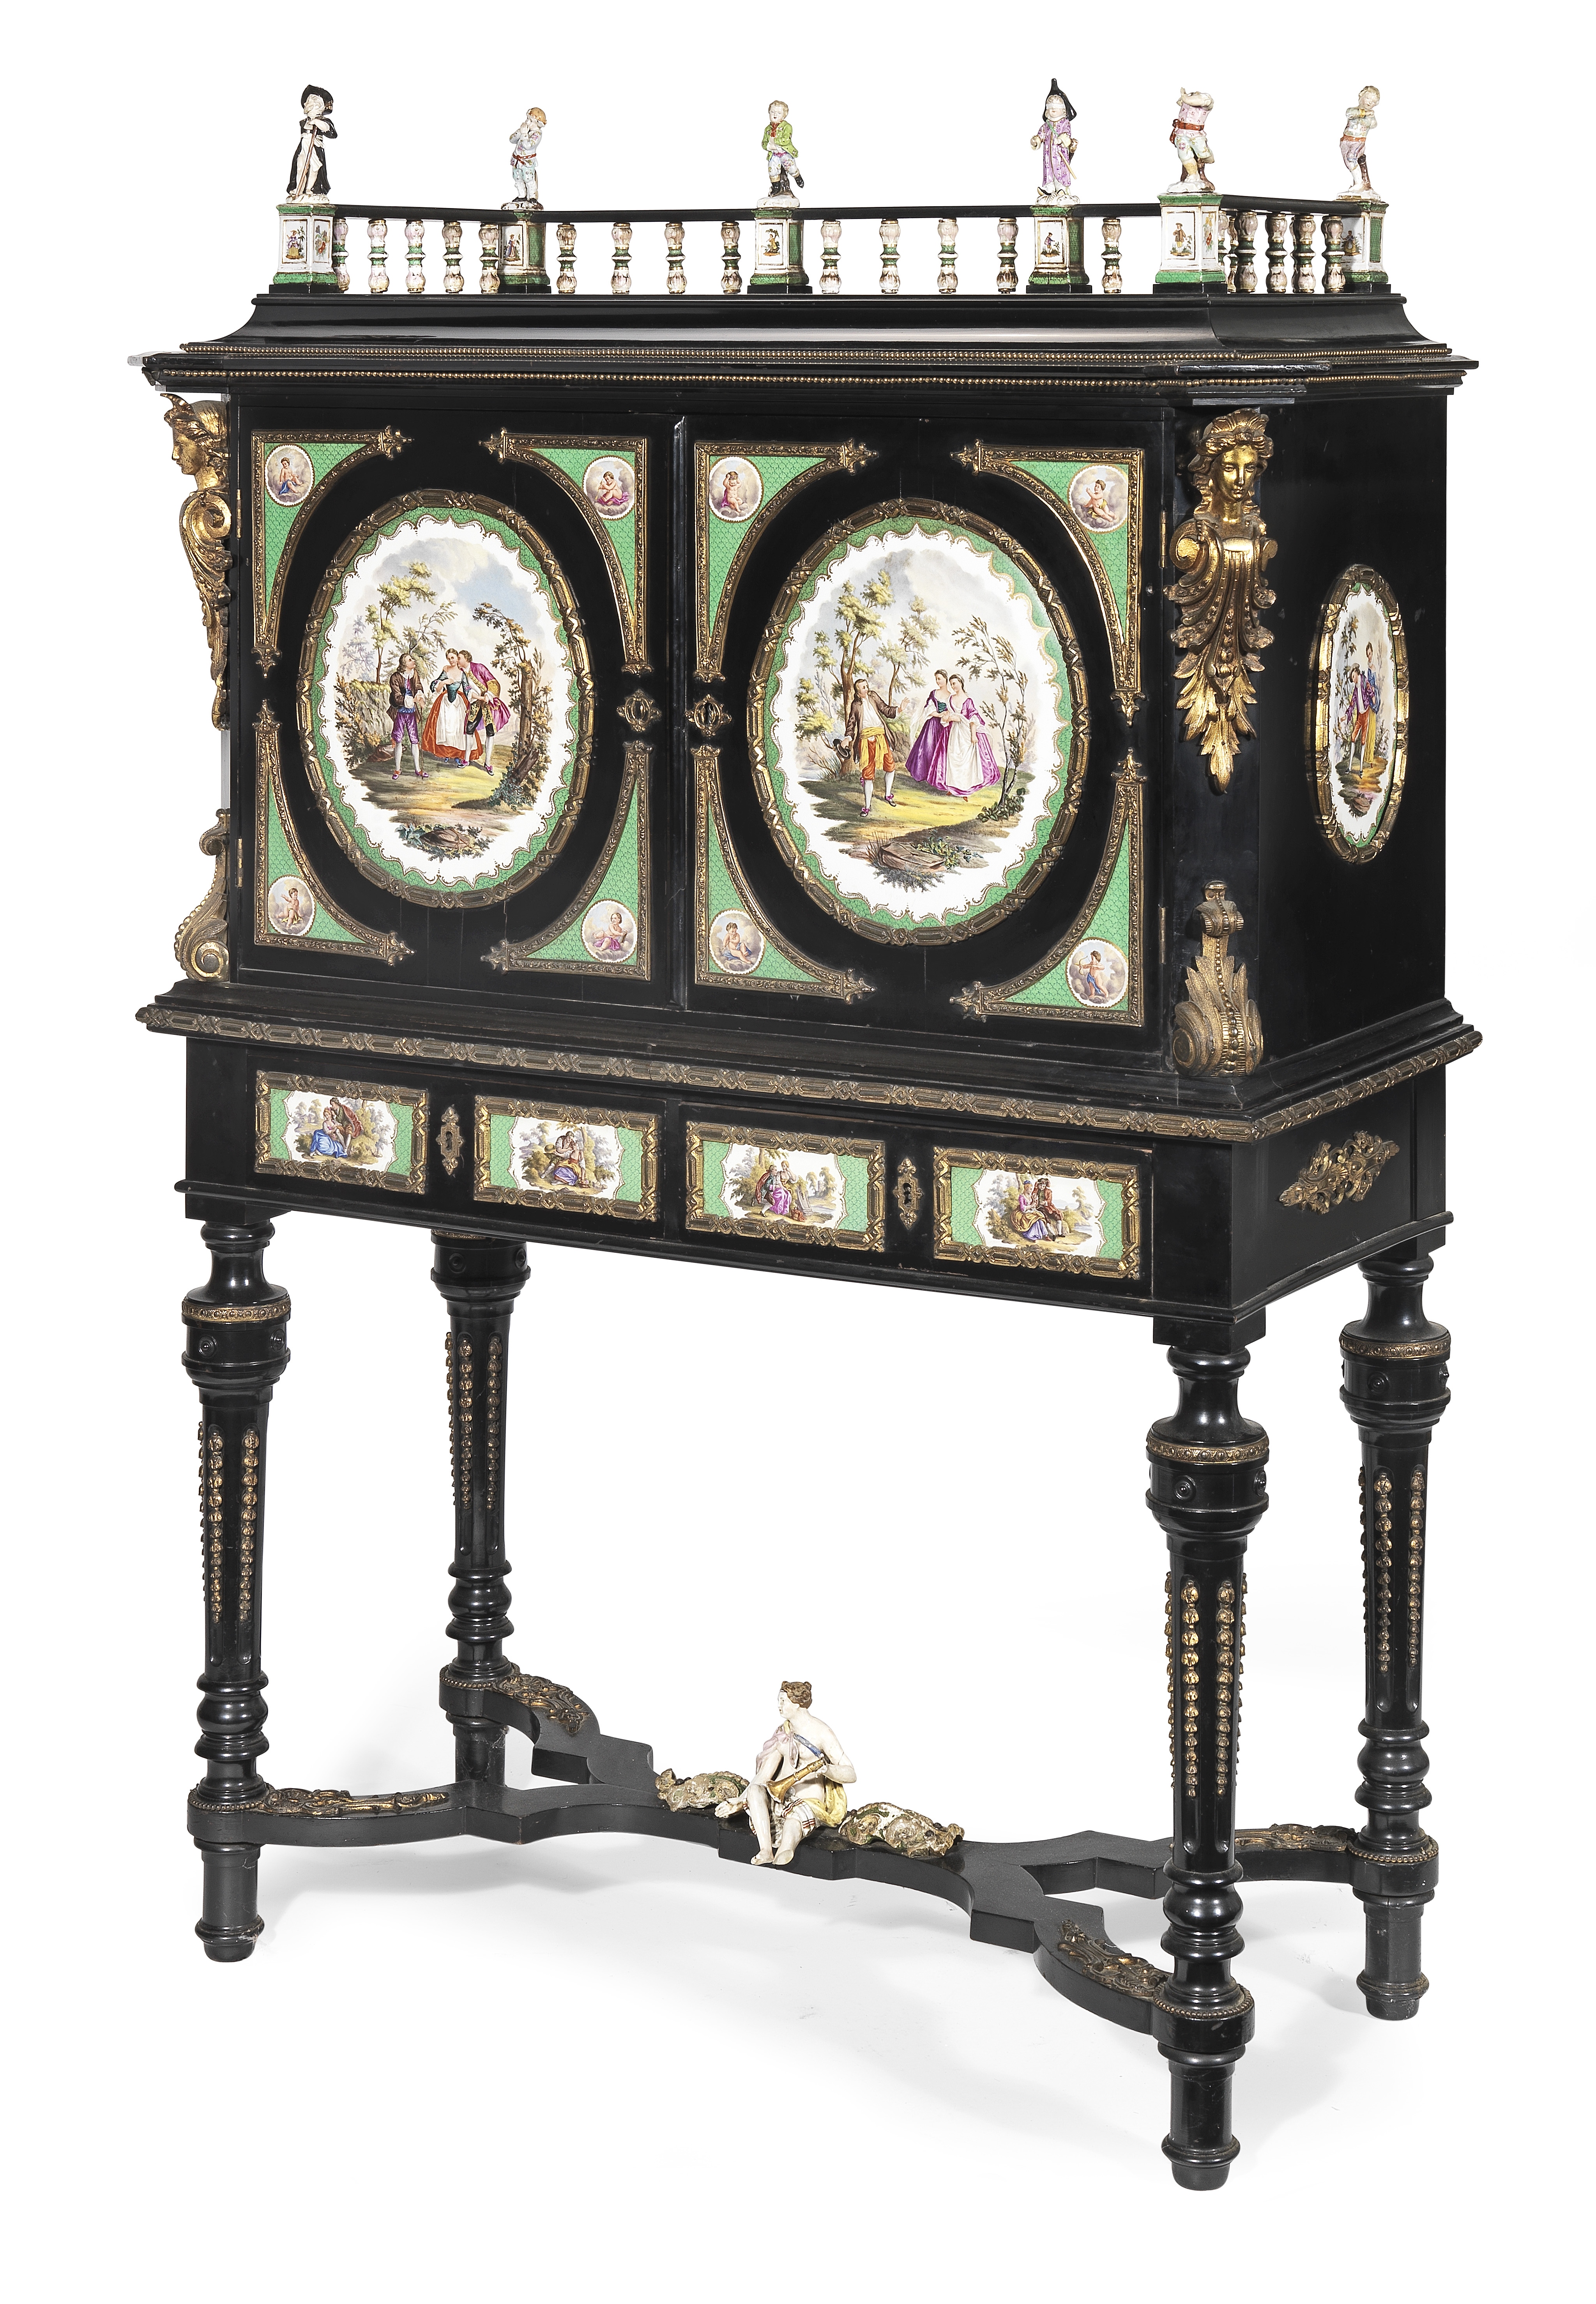 A pair of German 19th century porcelain and gilt bronze mounted ebonised cabinets on stands (2) - Image 2 of 4